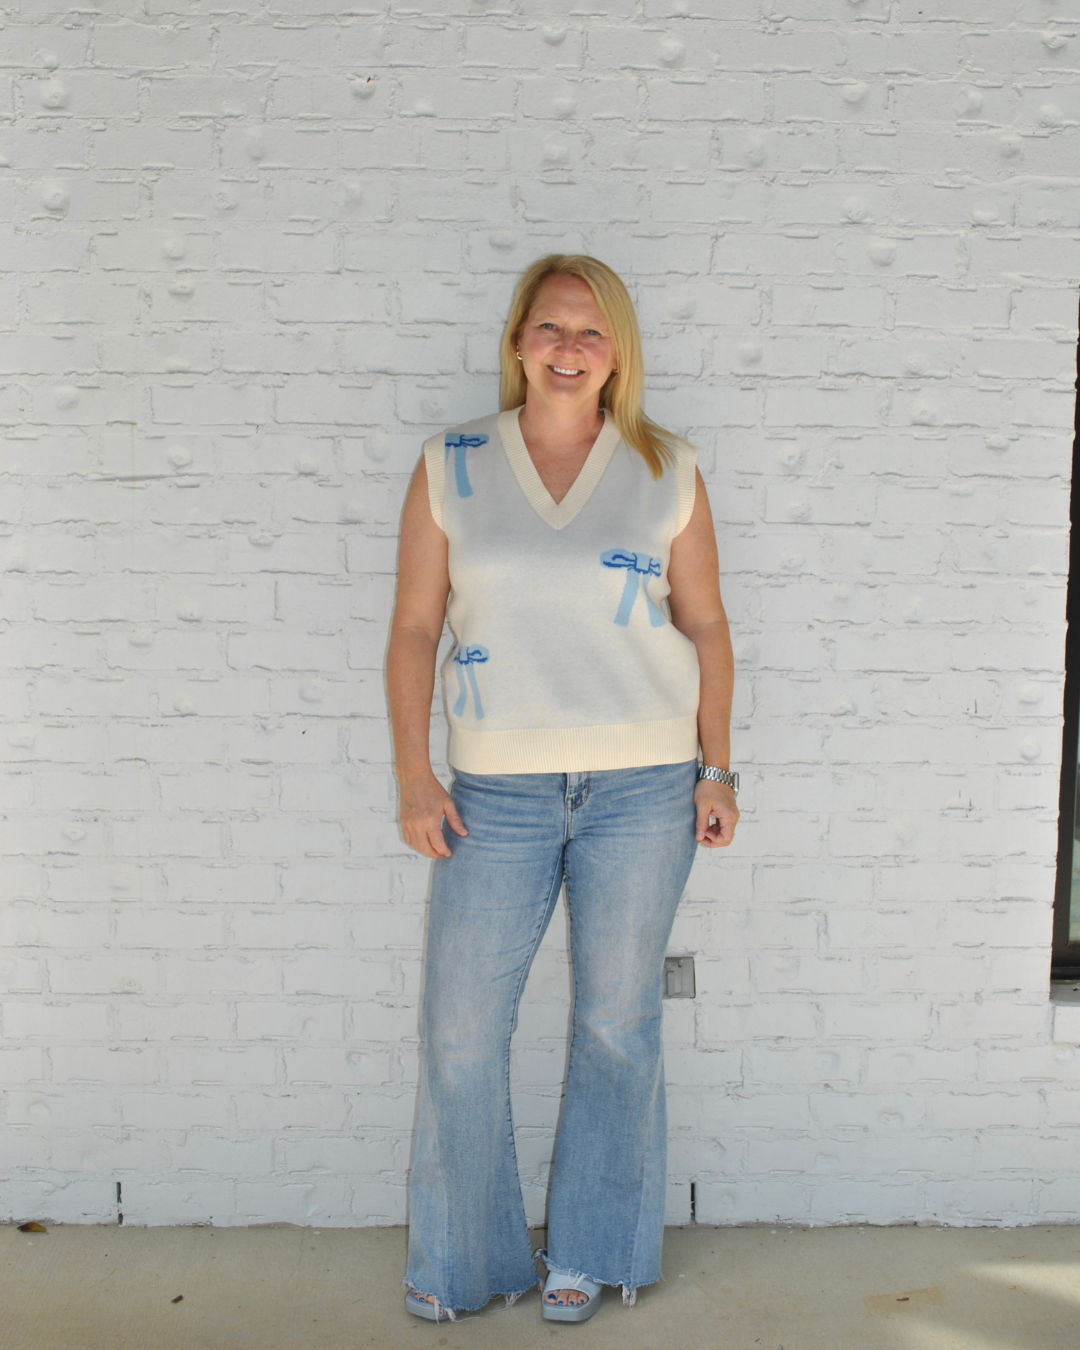 Bow sweater vest with jeans